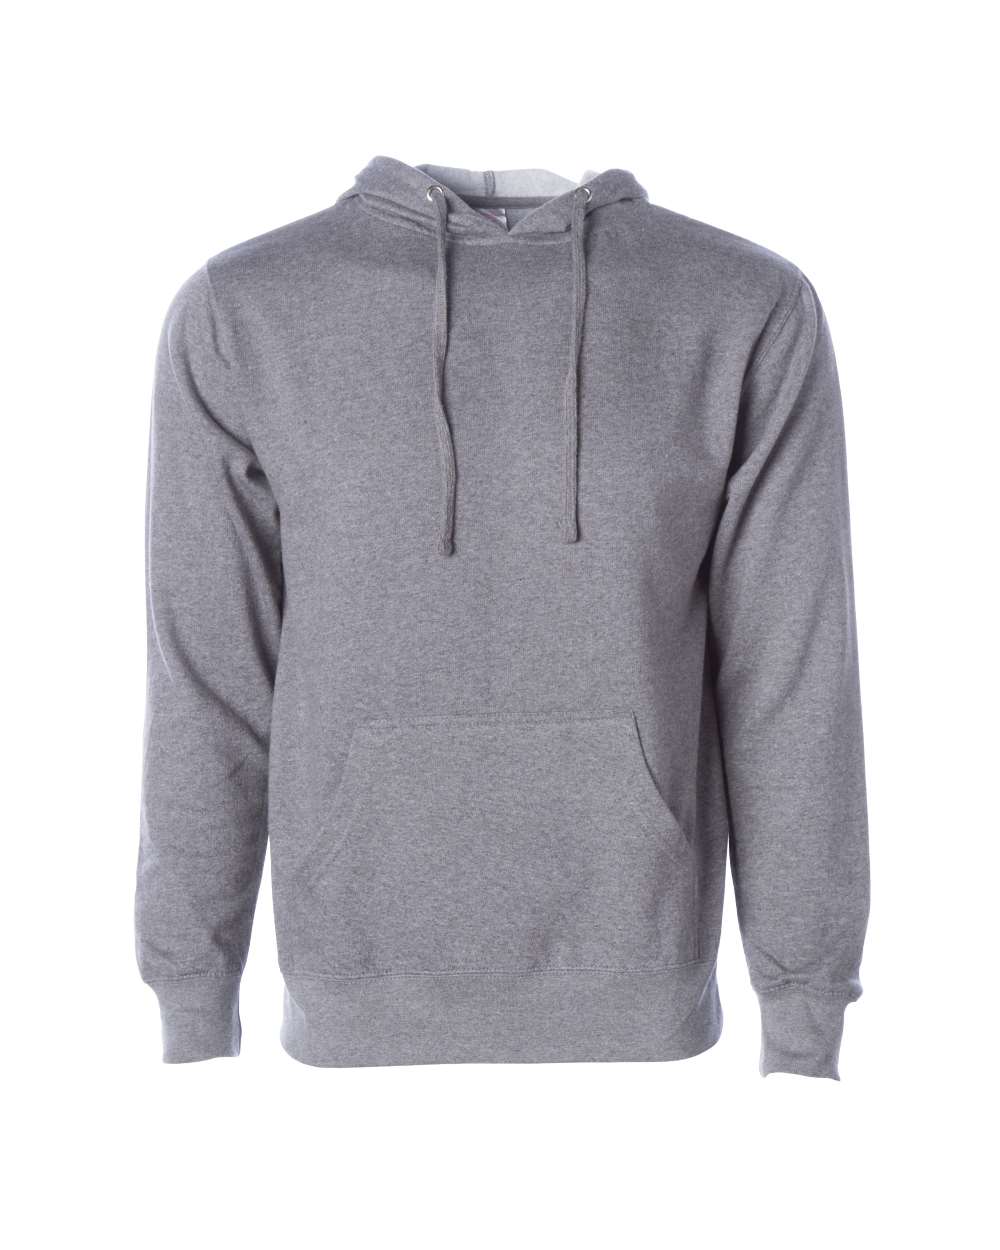 Independent Trading Co. Midweight Sweatshirt (SS4500)